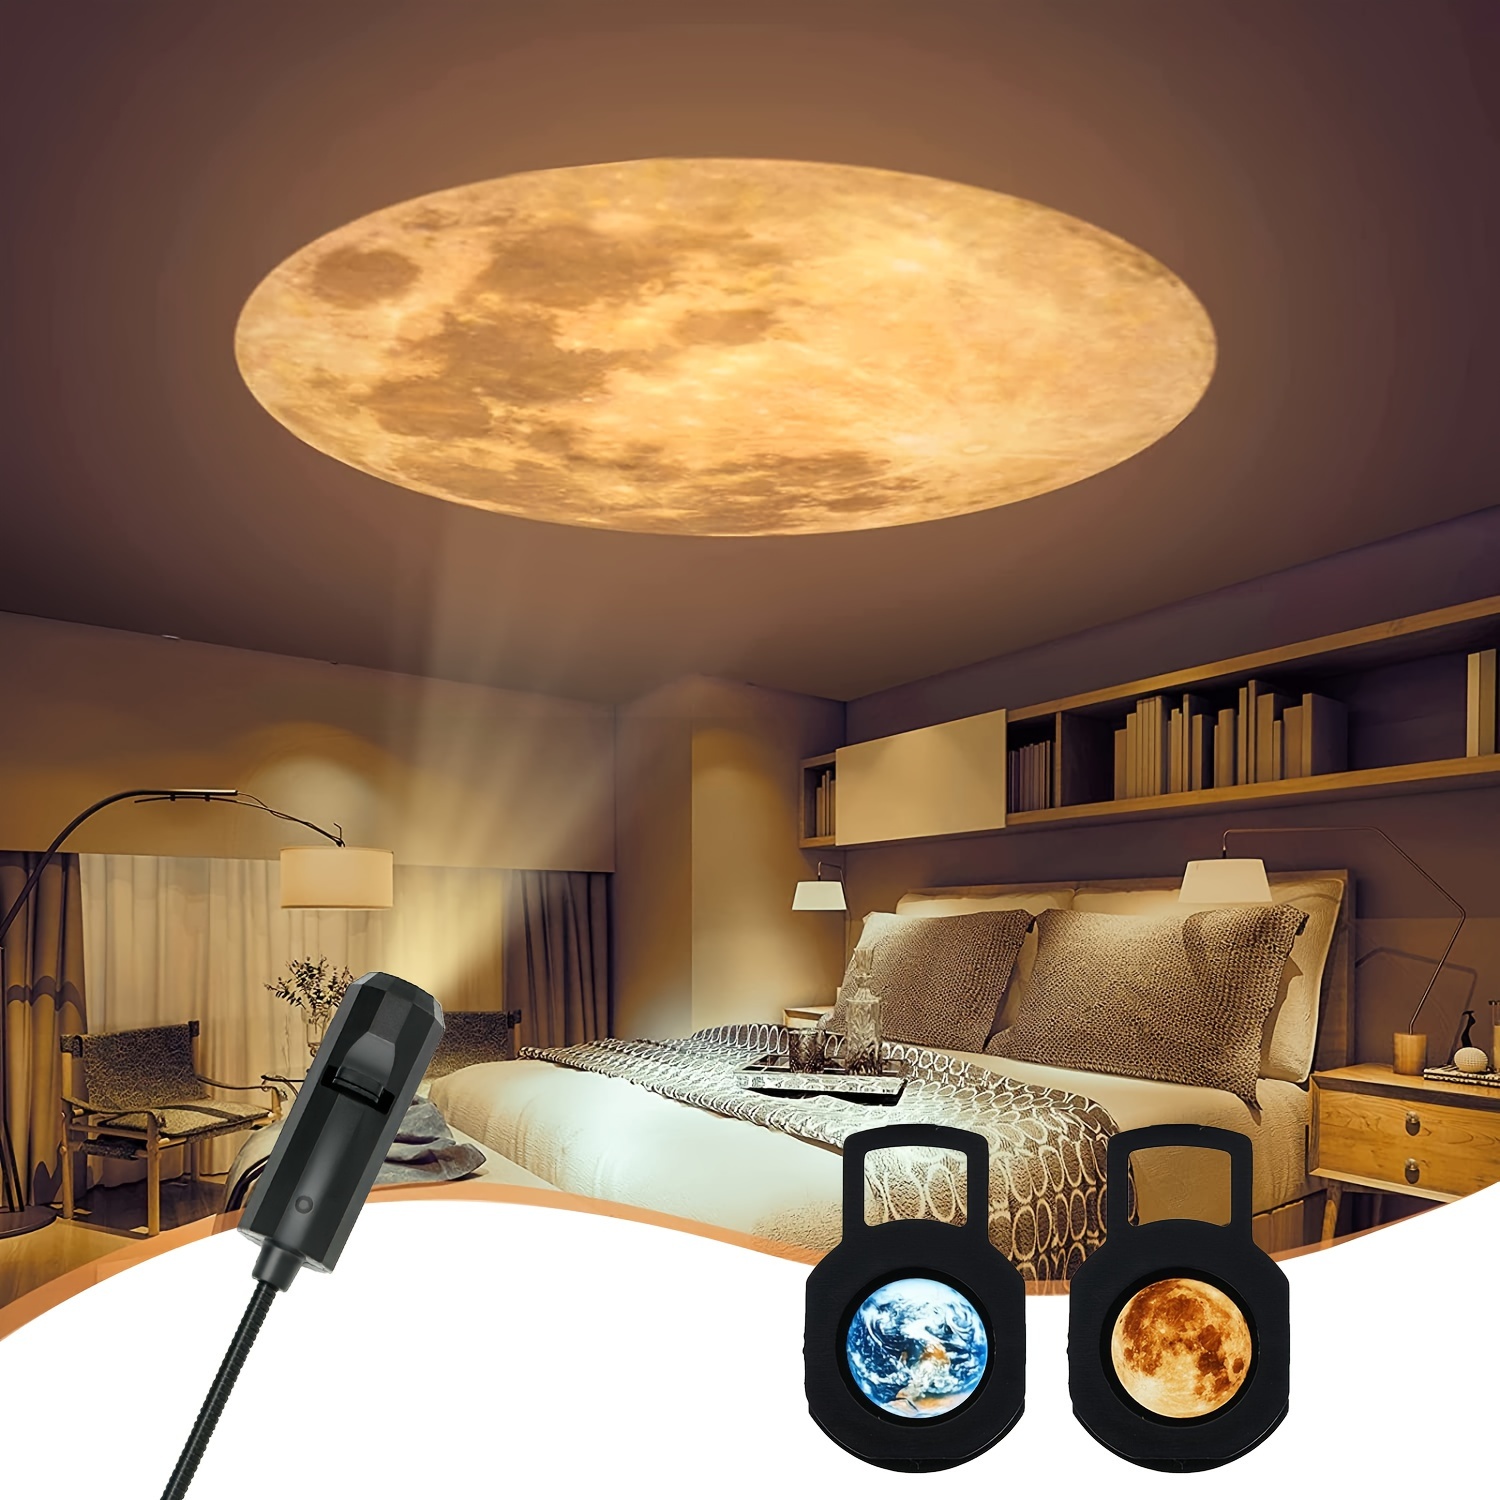 

Moon Earth Projector, Usb Night Light, 360° Rotatable, Moon Atmosphere Projector, For Home Bedside Table, Bedroom Living Room, Gift For Others, Room Decoration, Photo Background